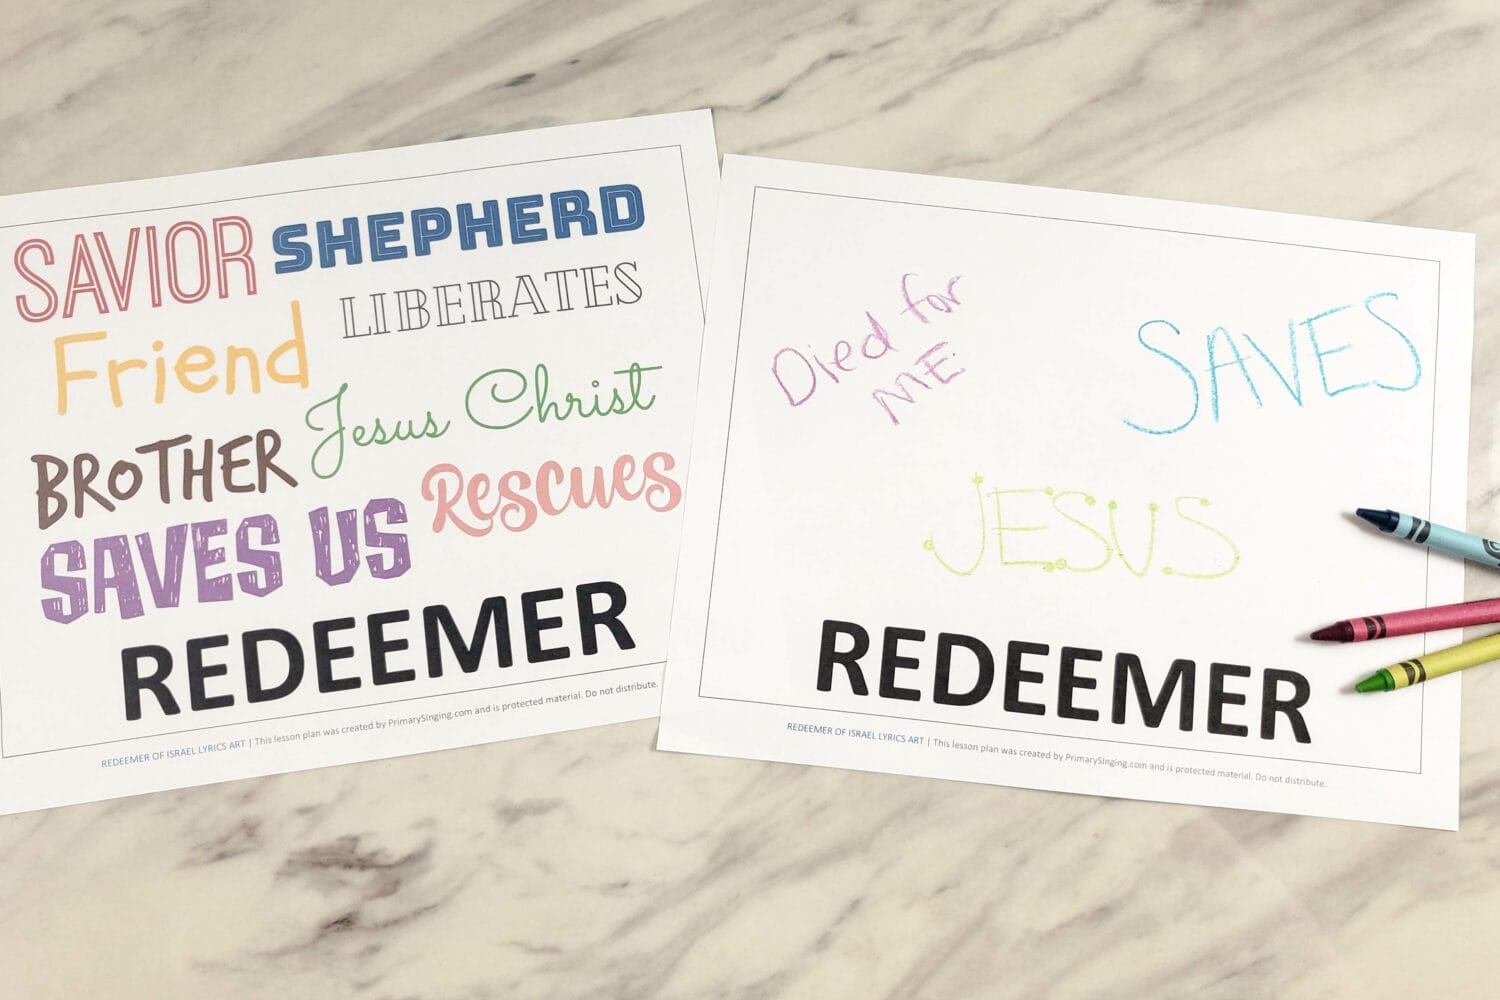 Redeemer of Israel Lyrics Art singing time idea with printable song helps to teach these big keywords for the LDS hymn. Helpful lesson plan for Primary Music Leaders.